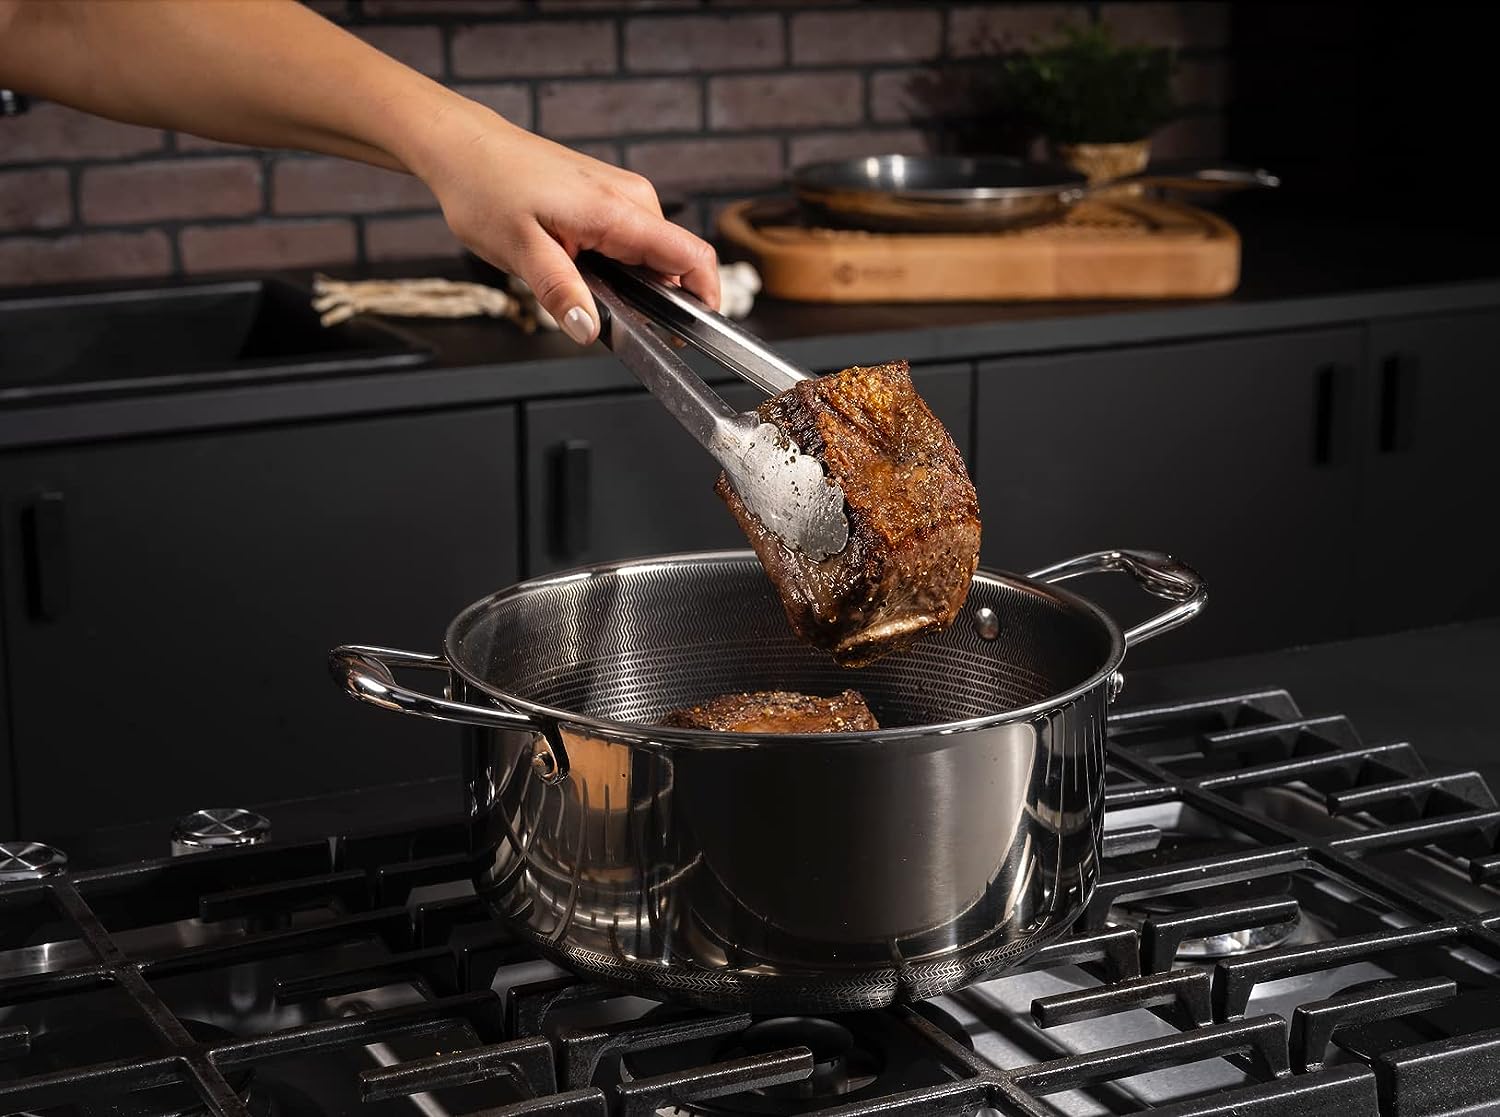  HexClad Hybrid Nonstick Dutch Oven, 5-Quart, Stainless Steel Lid,  Dishwasher and Oven Safe, Induction Ready, Compatible with All Cooktops:  Home & Kitchen